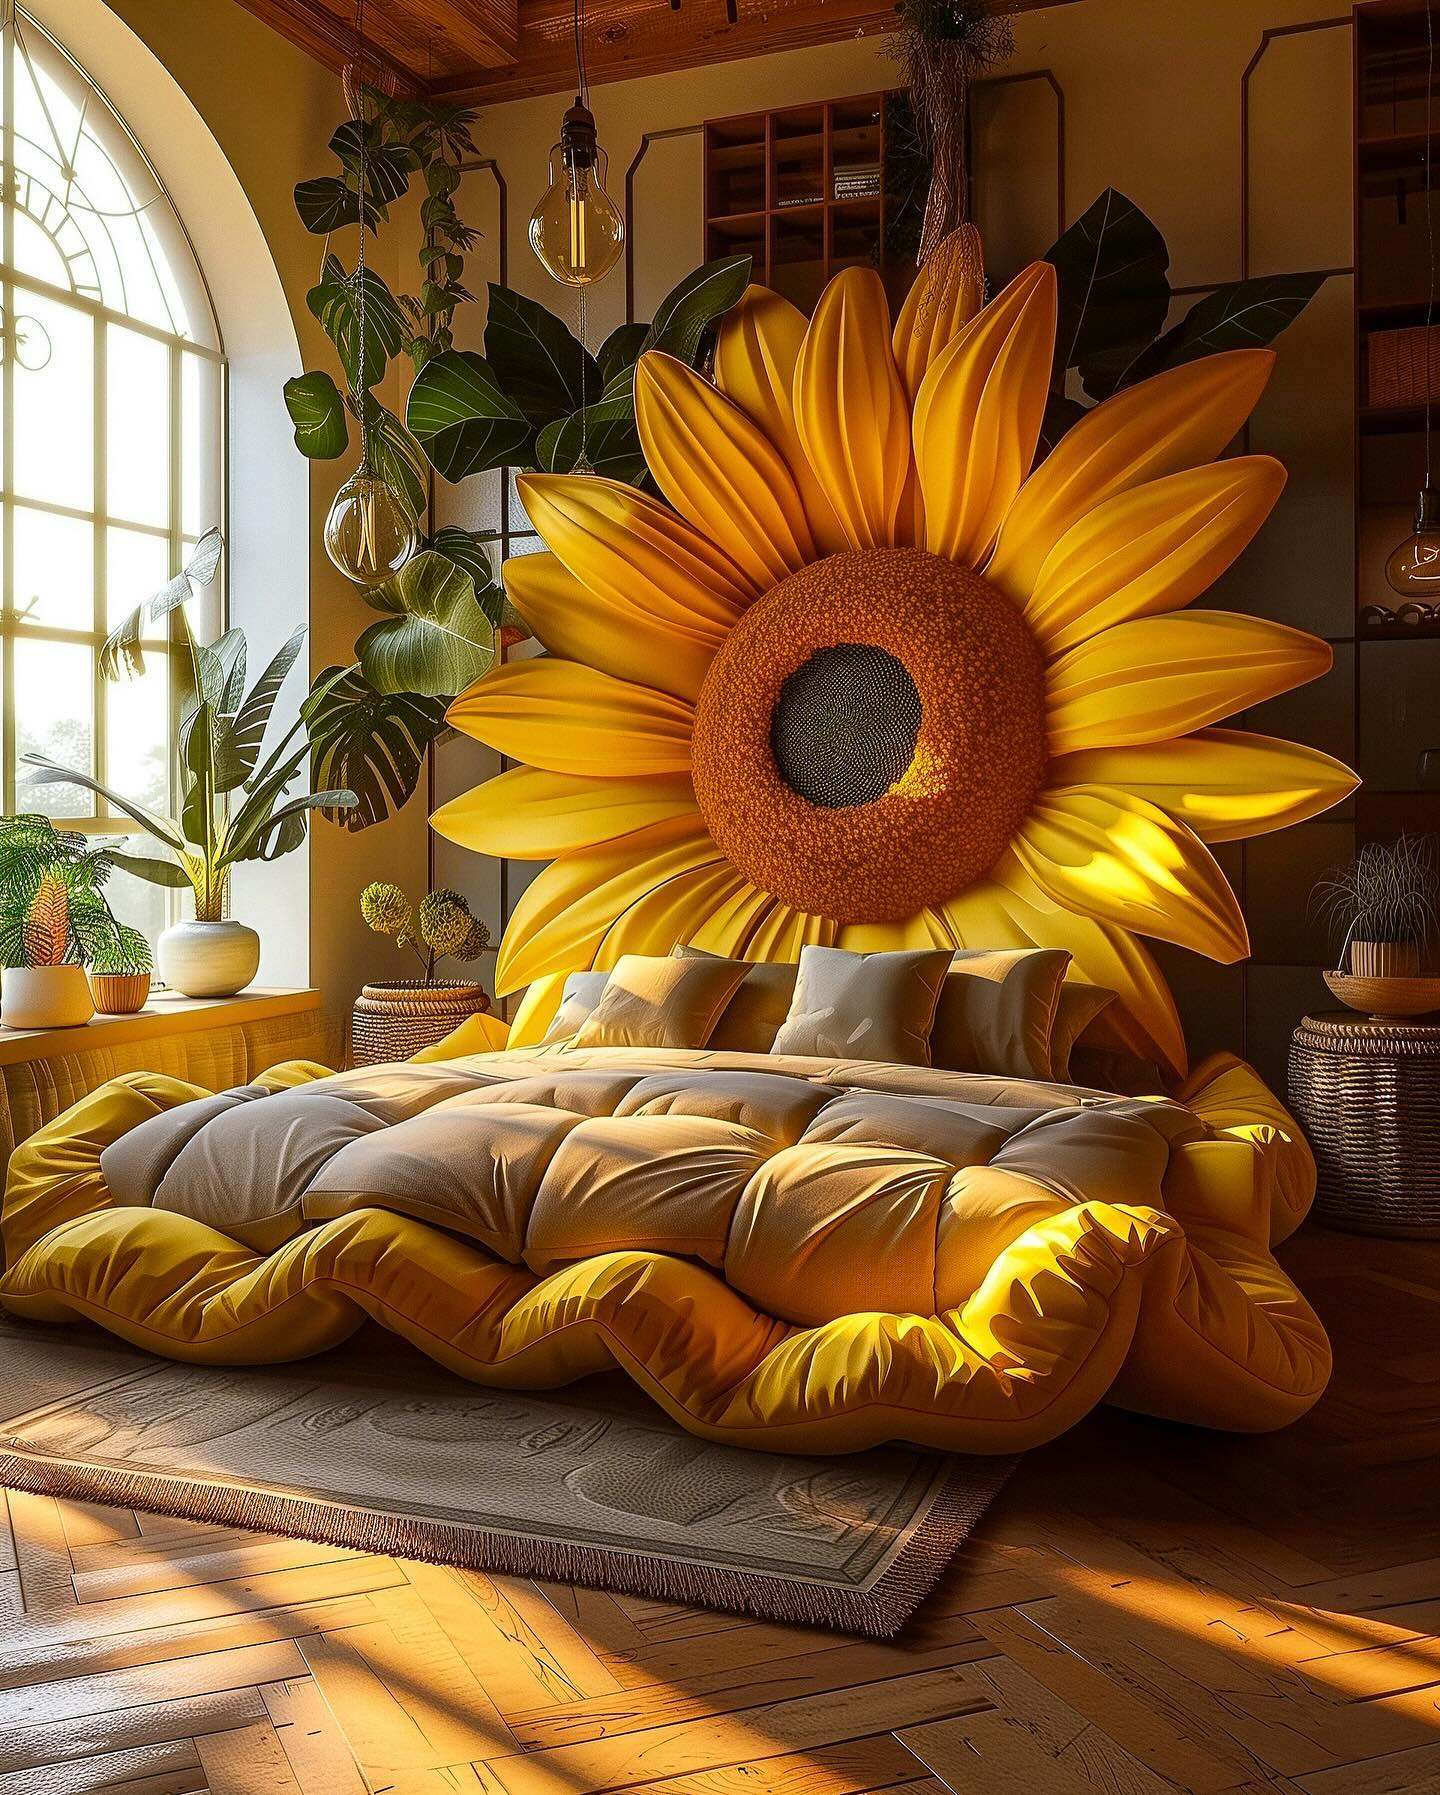 Sunflower Shaped Bed: Infusing Sunshine and Style into Your Sleep Haven